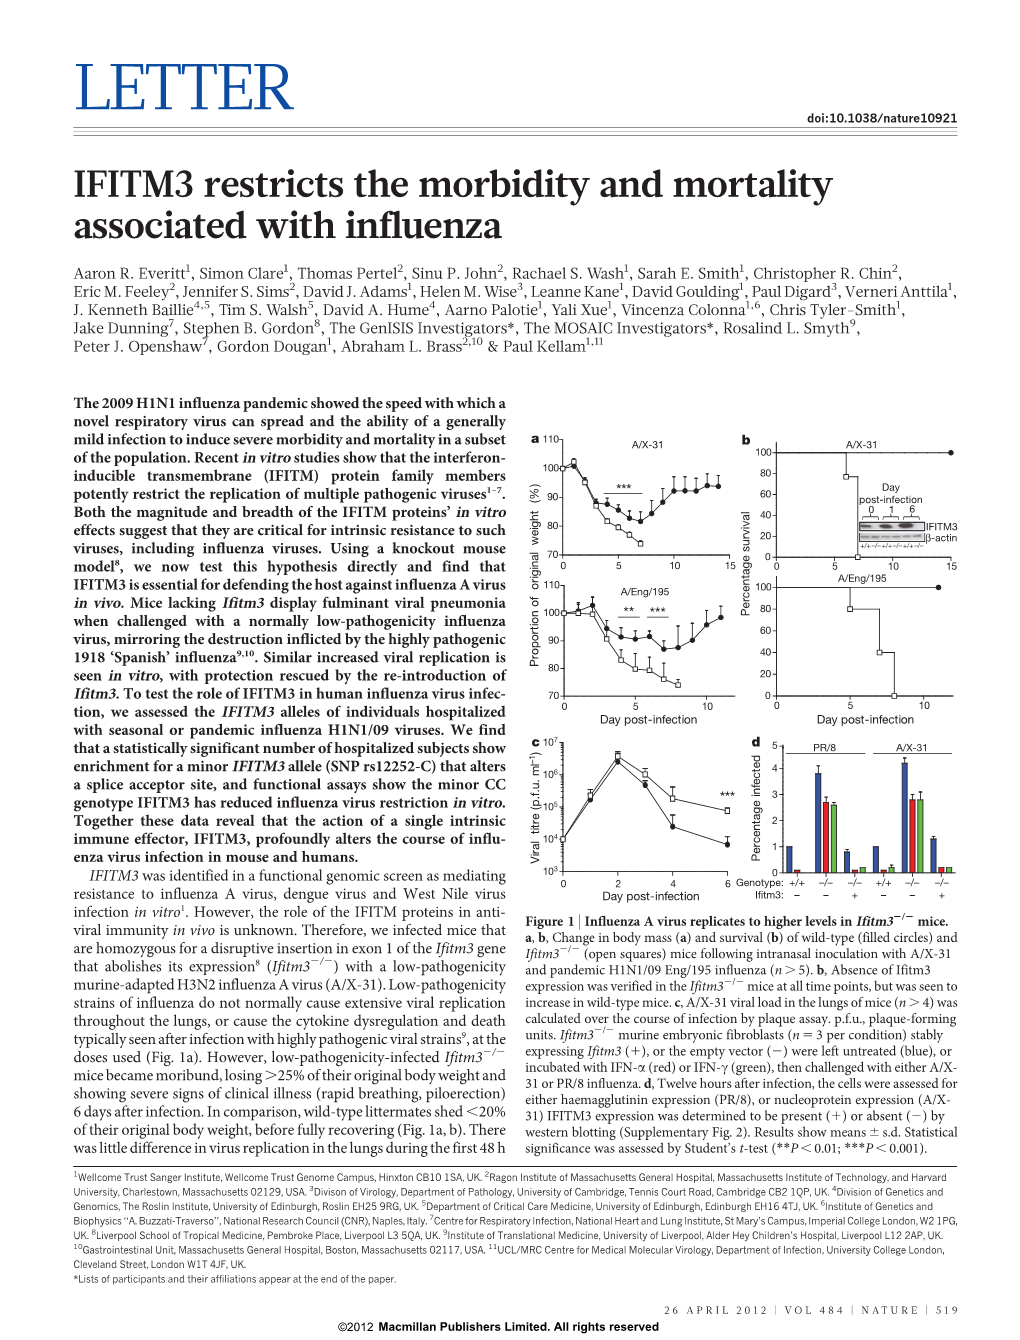 IFITM3 Restricts the Morbidity and Mortality Associated with Influenza